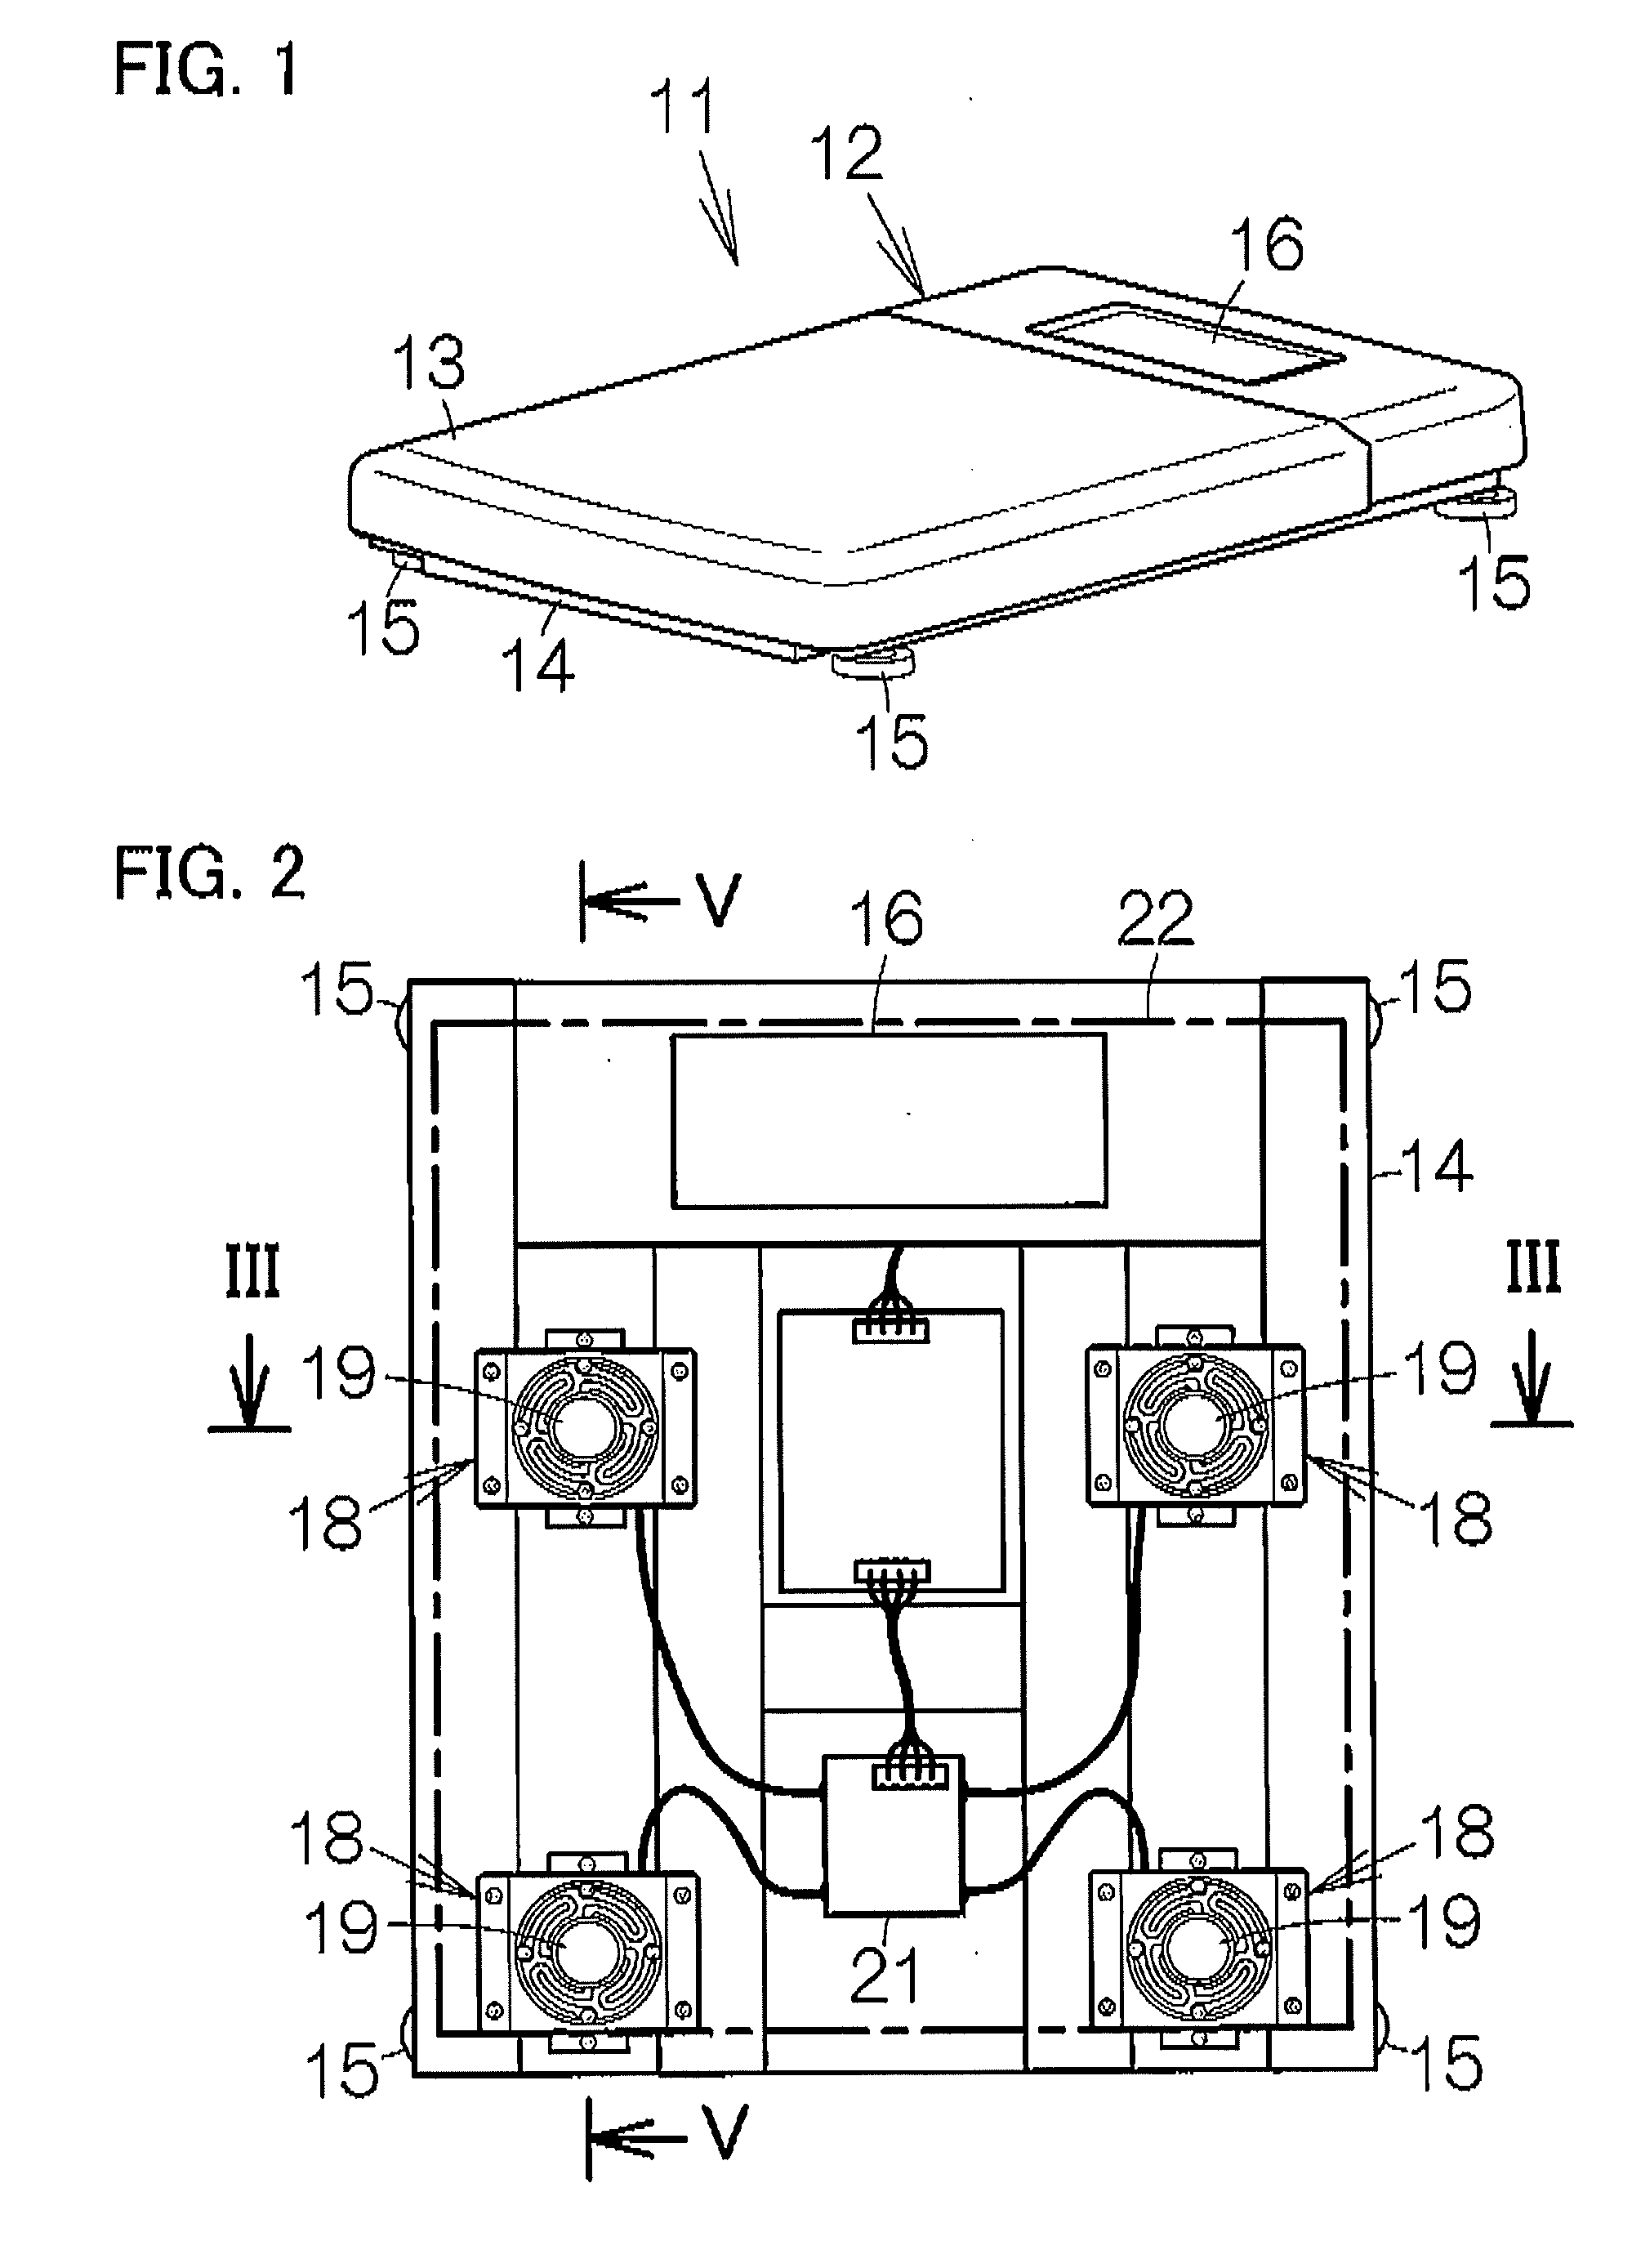 Weight measurement device